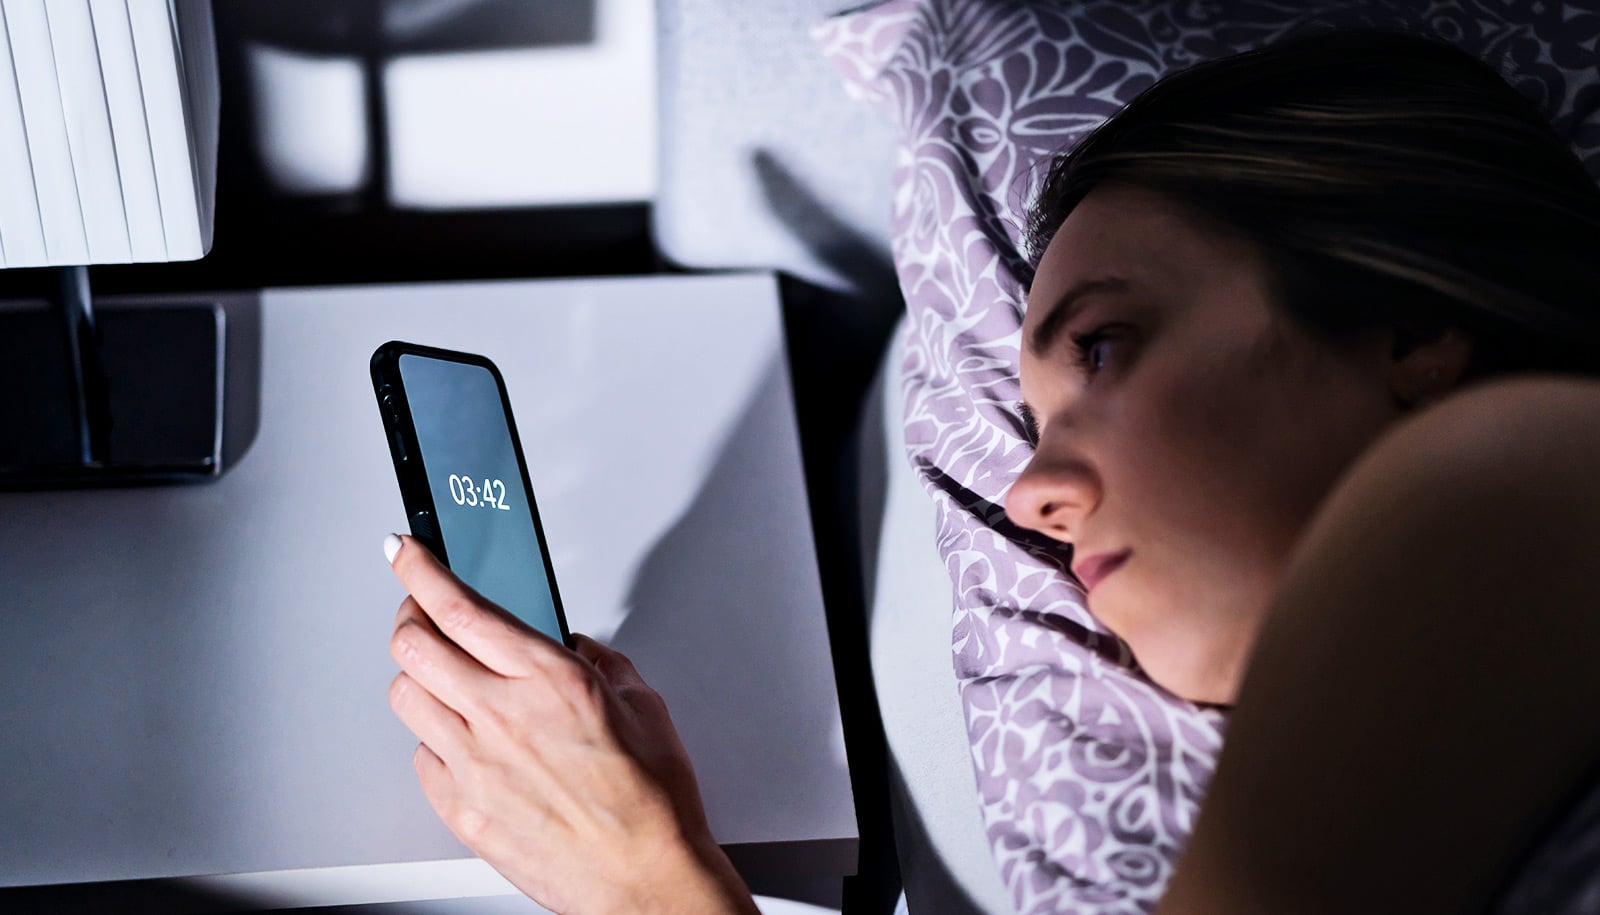 A woman laying in bed looks at the time on the phone on her bedside table.